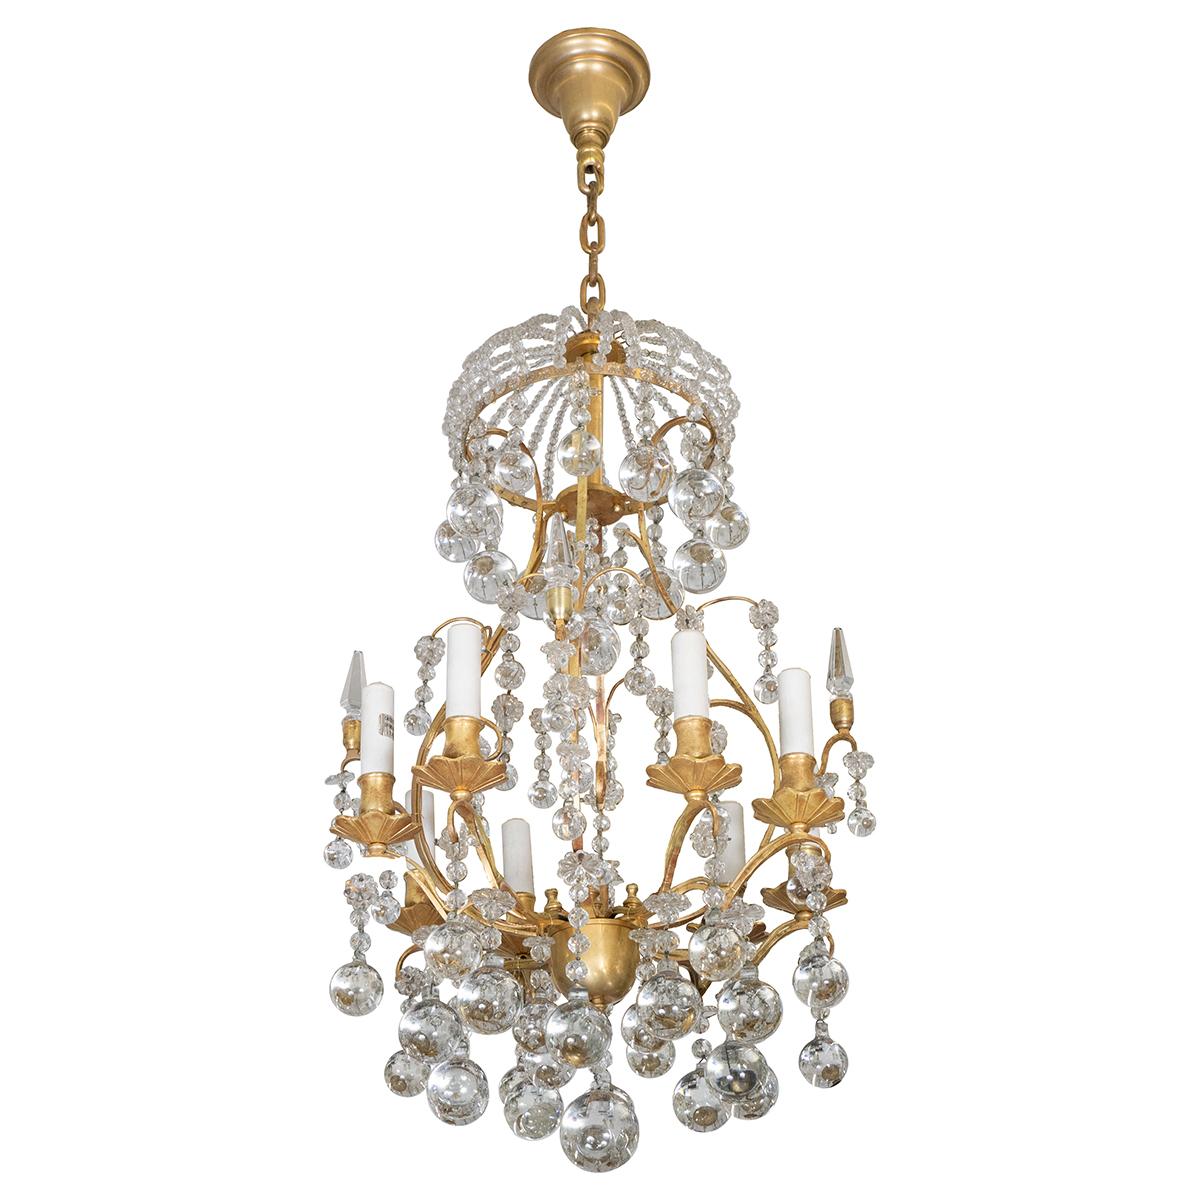 Gilt metal finish chandelier featuring various styles of crystal drop elements and cast flower bobeches.